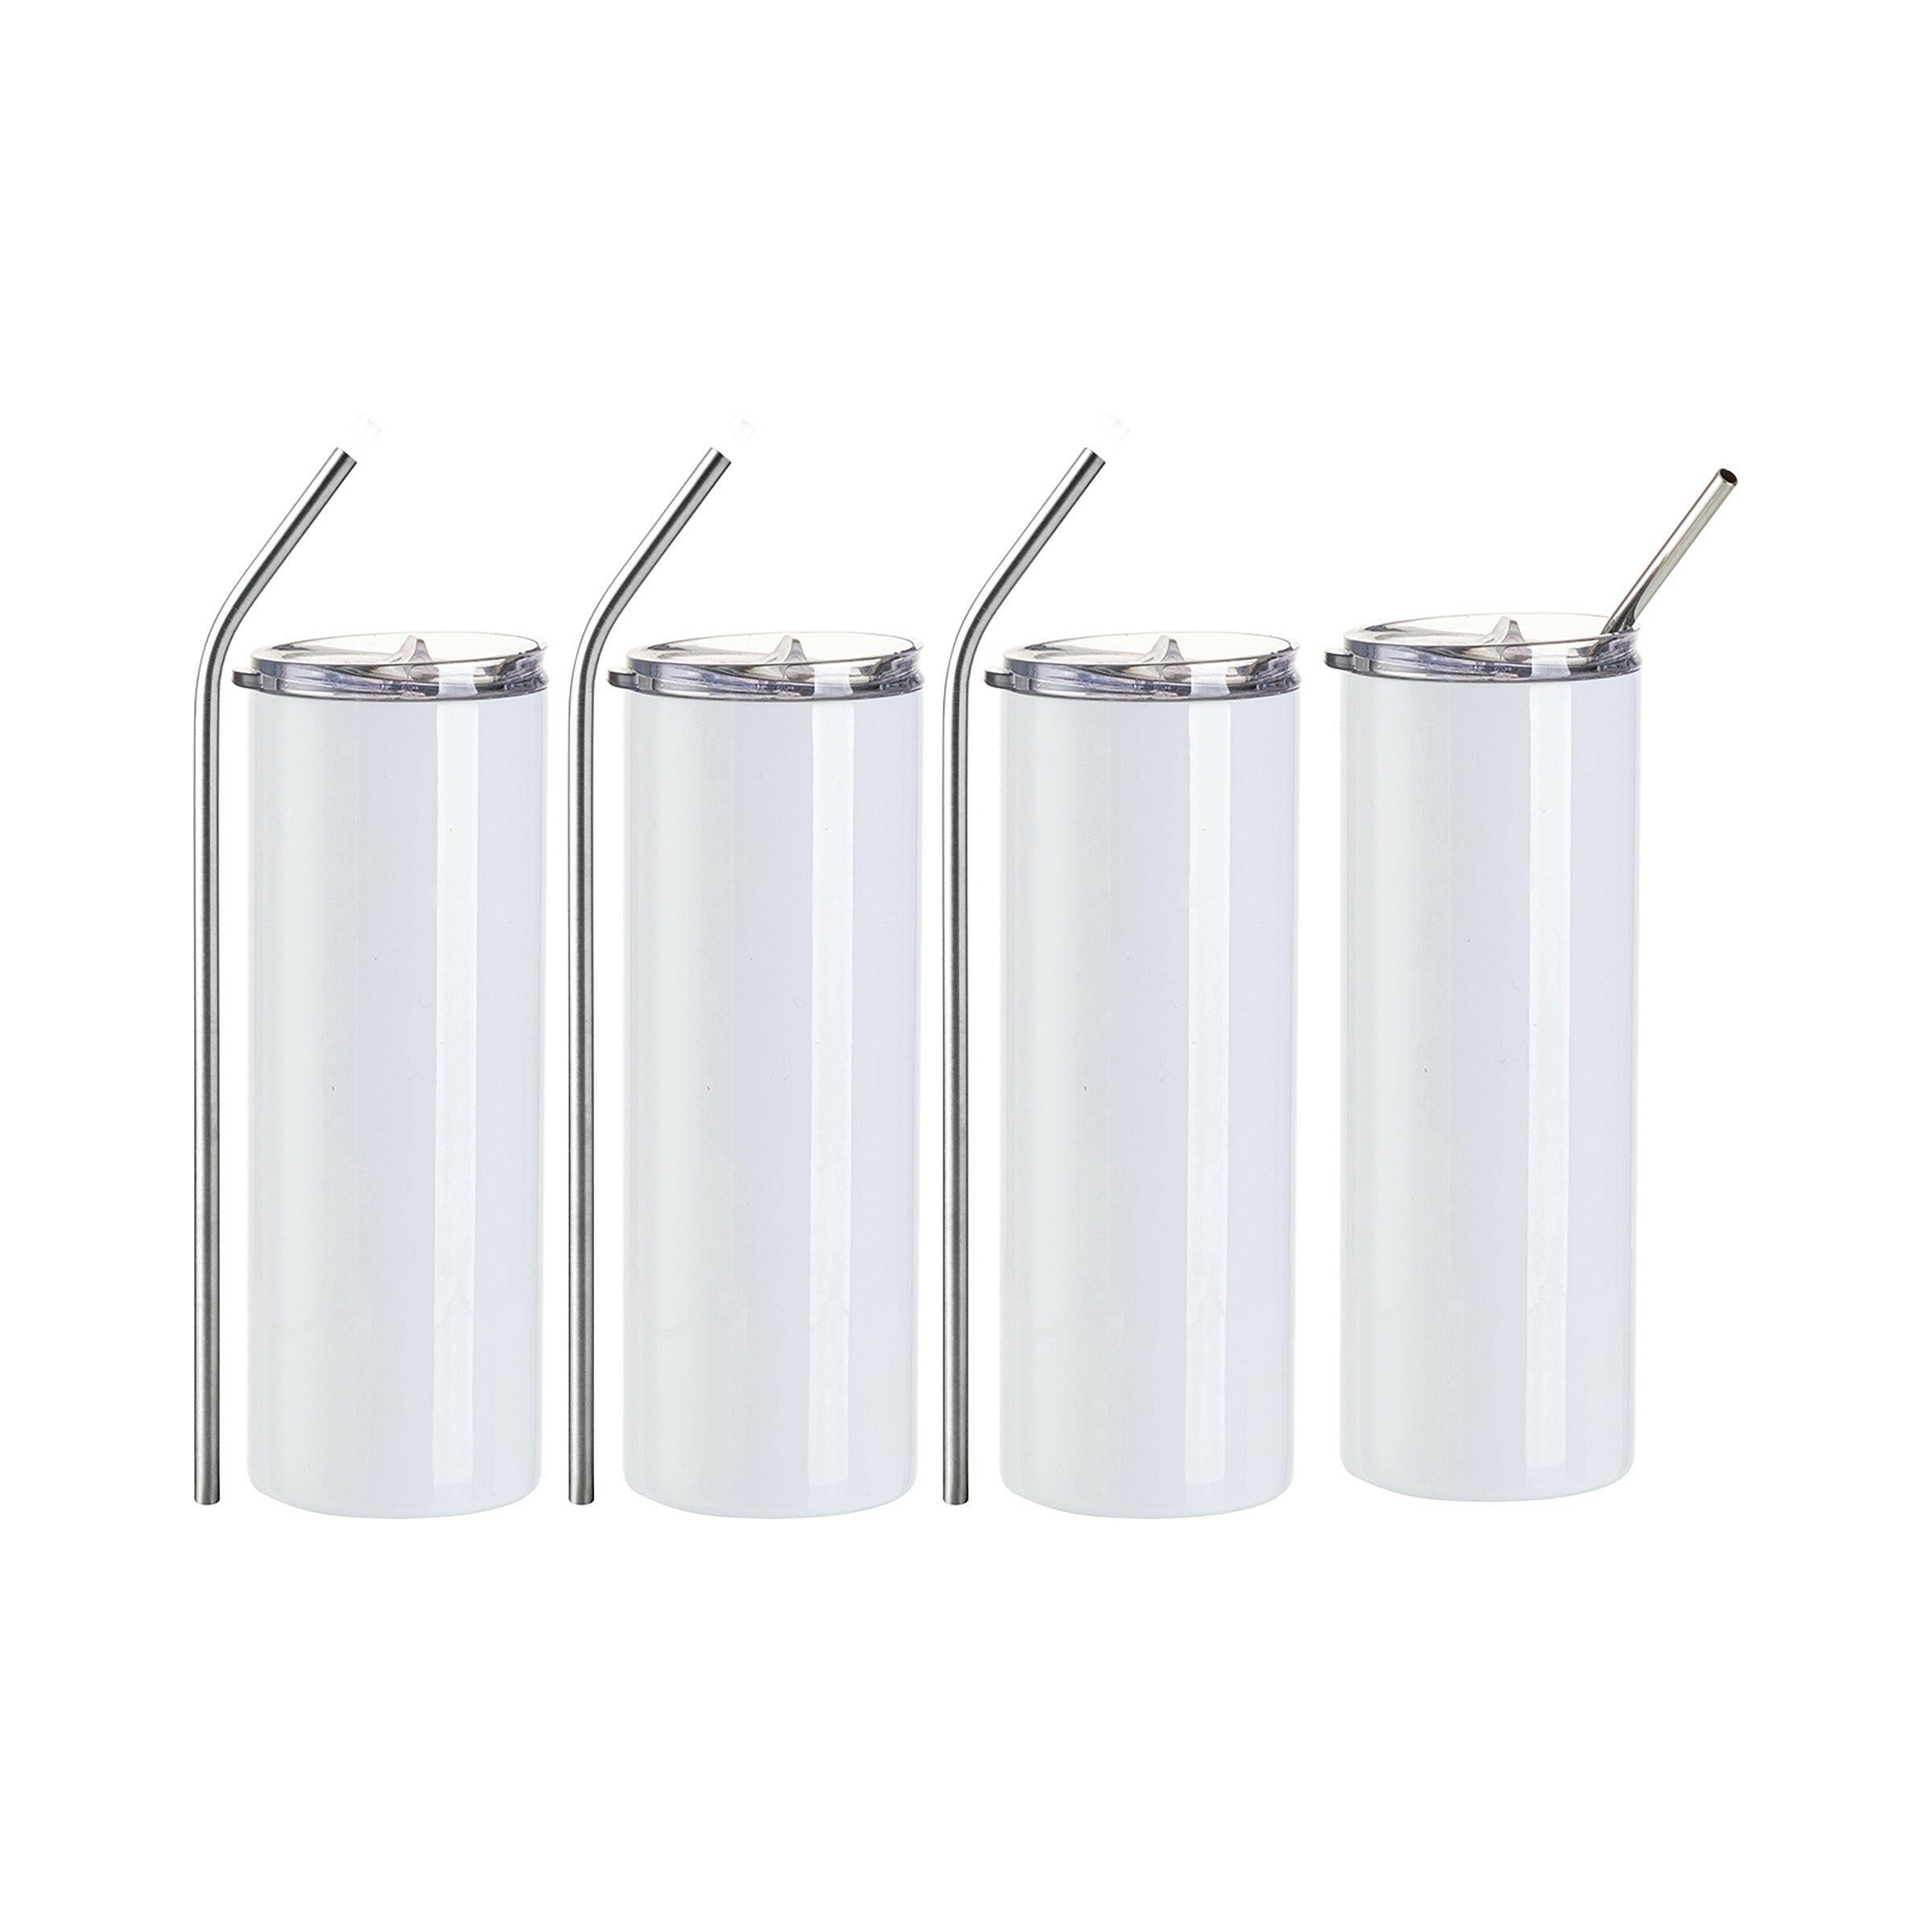 20oz Stainless Steel Sublimation Skinny Tumbler - 4 Pack.